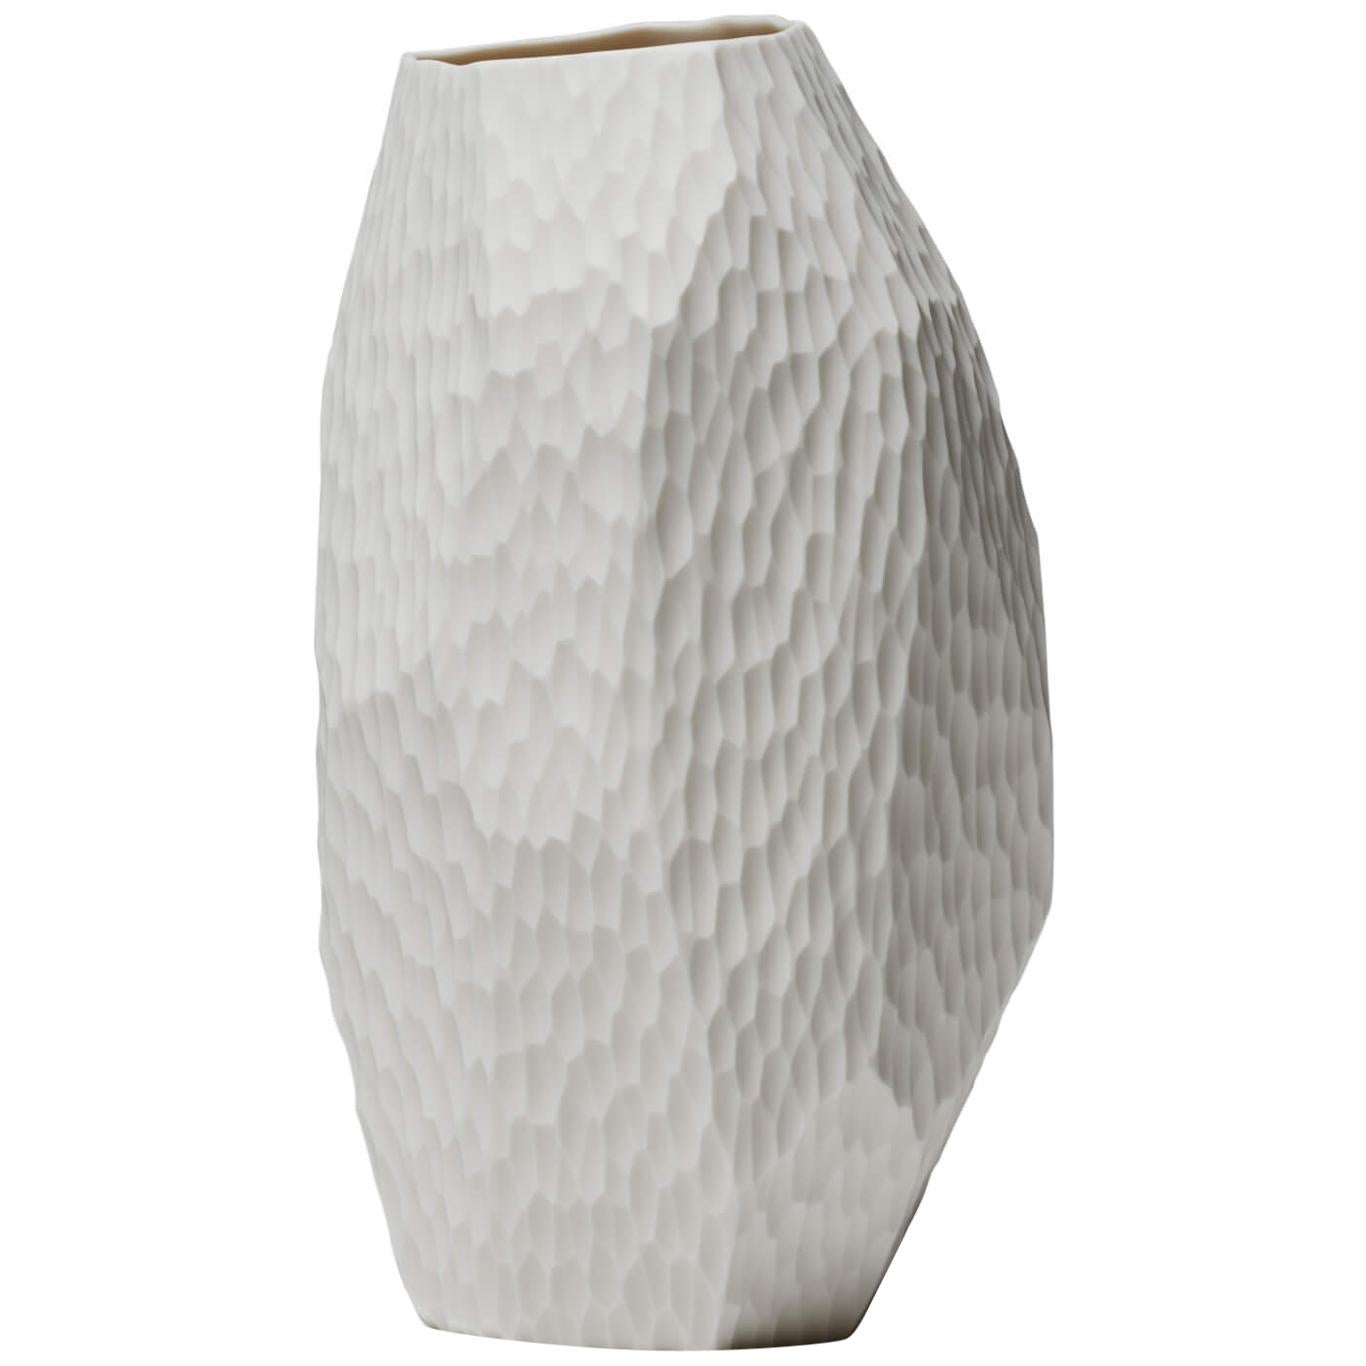 Contemporary Porcelain 'Fragment Vase' by Vezzini and Chen For Sale